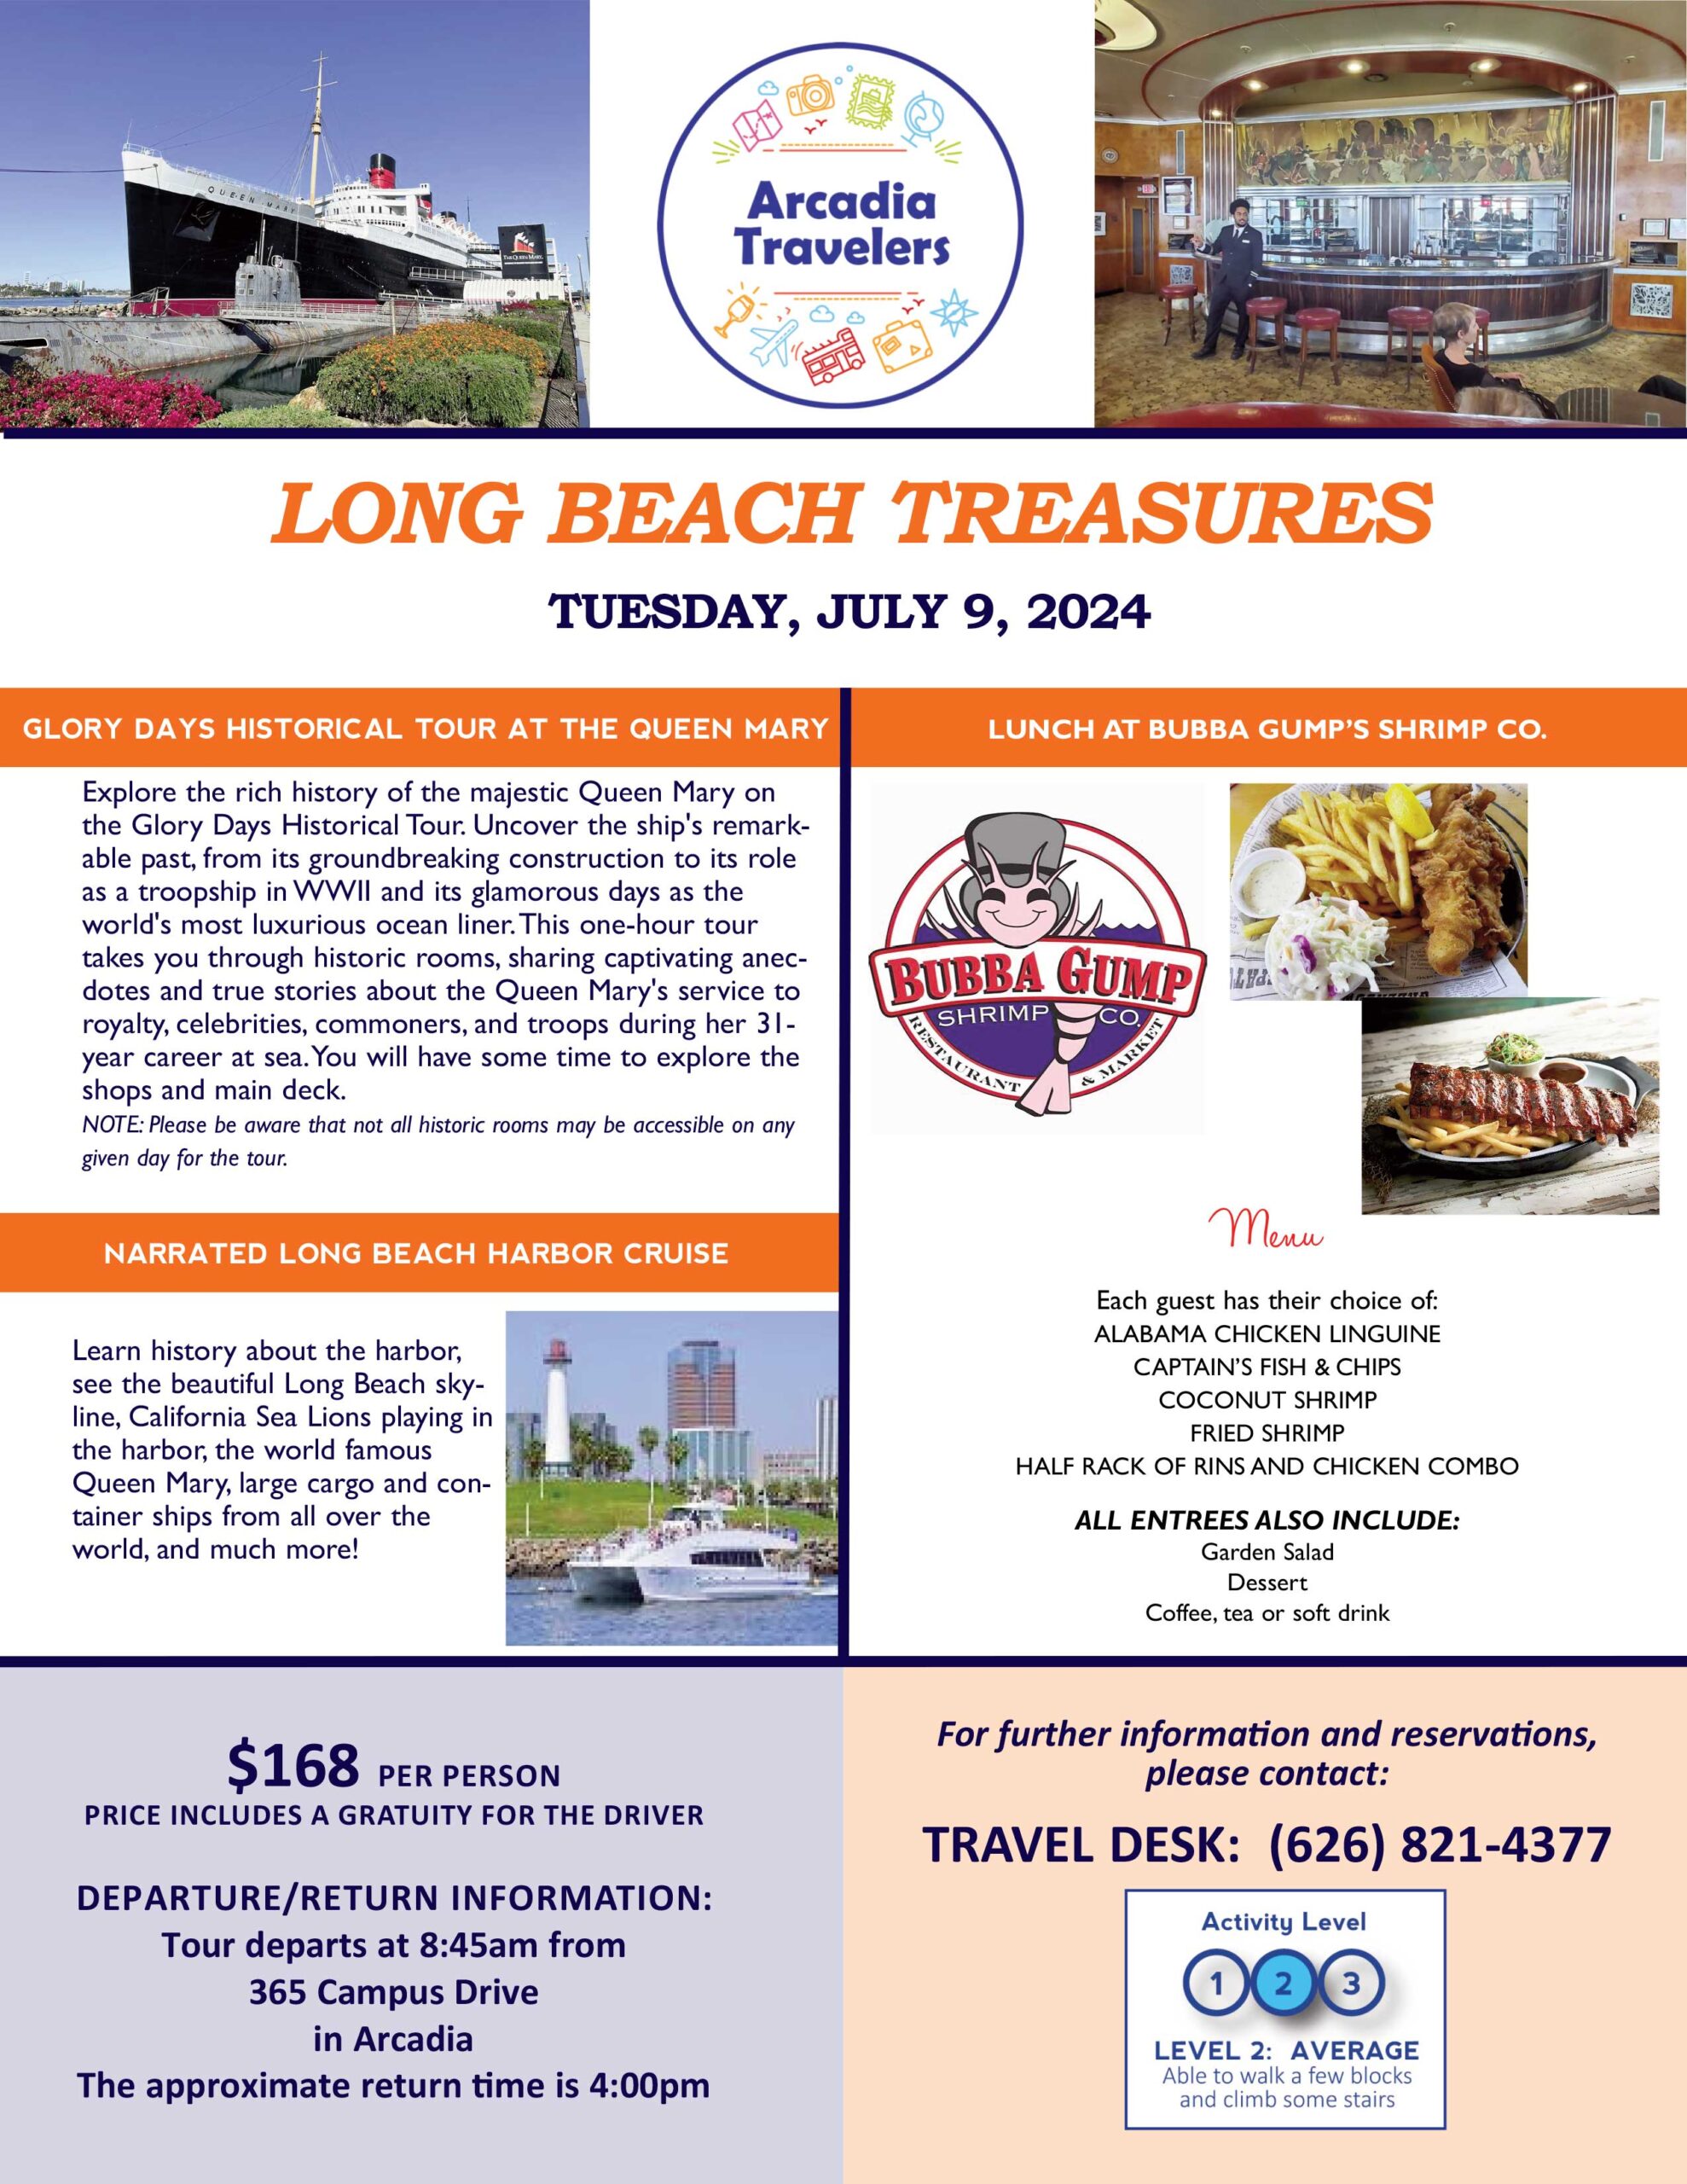 Arcadia Travelers tour flyer for Long Beach on July 9th, 2024